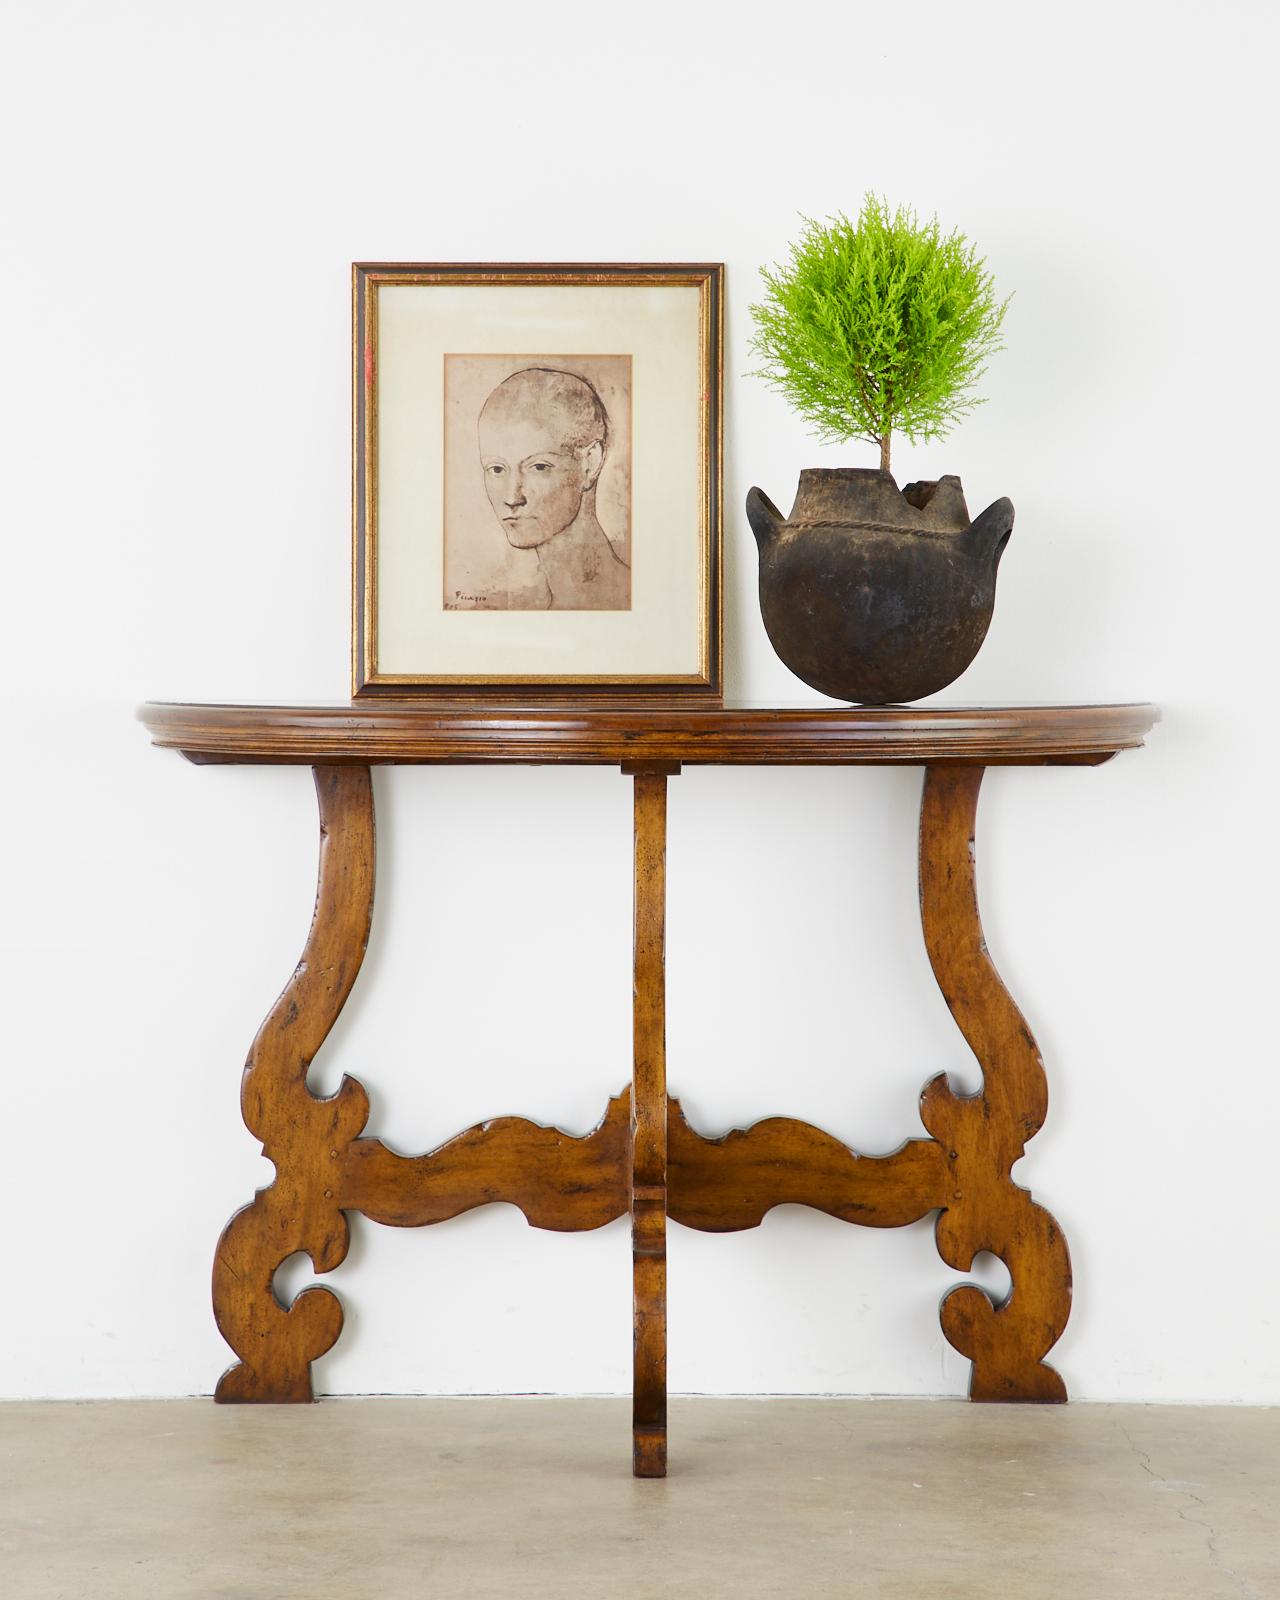 Handcrafted Italian walnut demilune console table constructed from walnut. Beautifully finished with an intentionally aged and distressed finish. The tripod leg base has mortise and Tenon joinery with scrolled shapes. Made from 1.25 inches thick